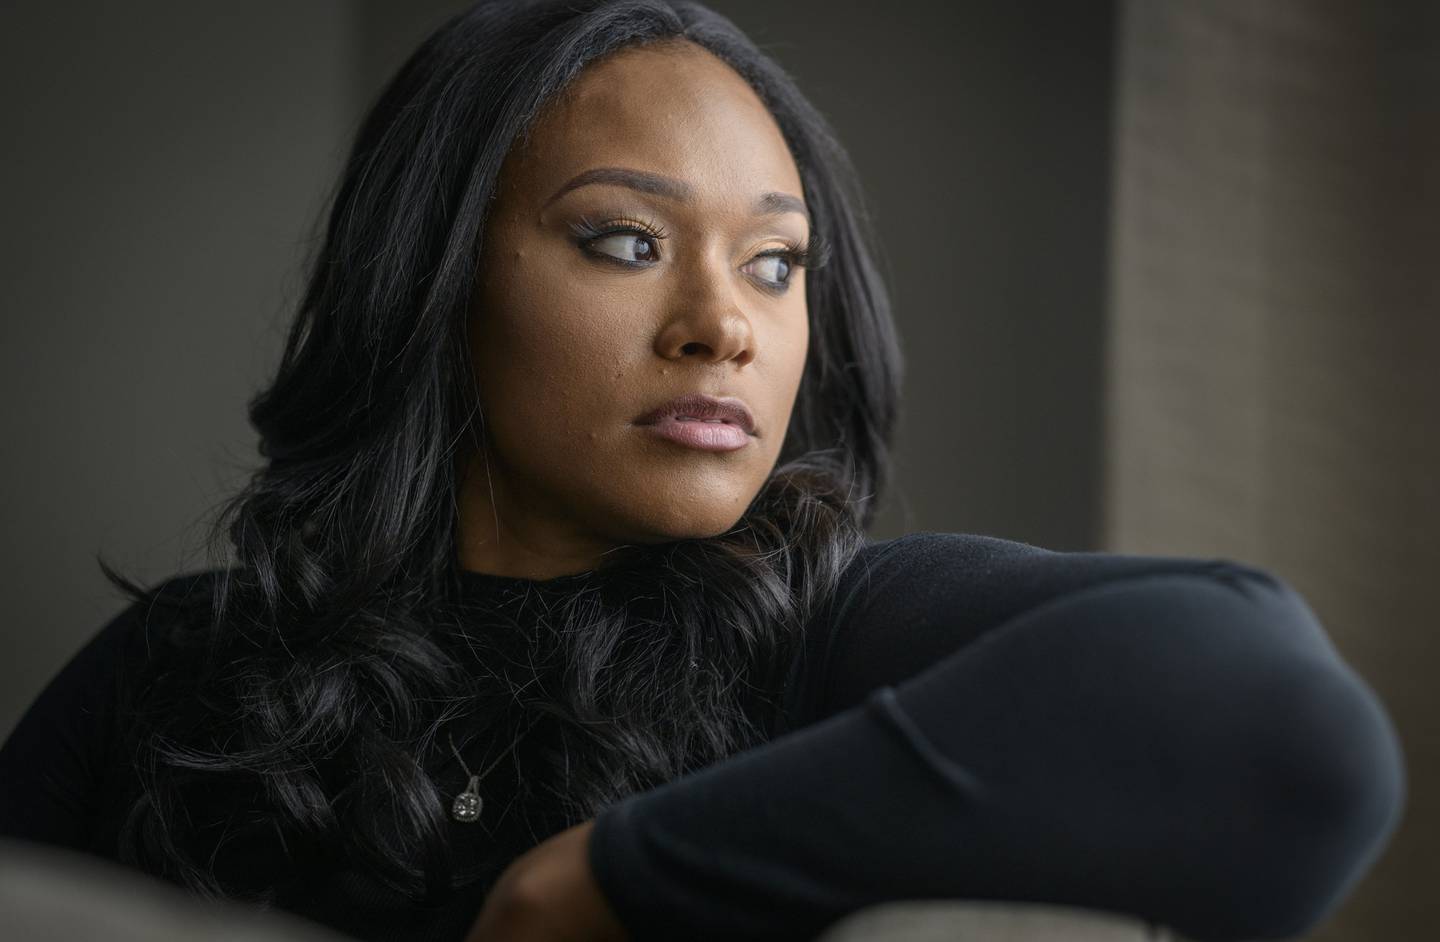 Lisa Van Allen, who was involved with the singer R. Kelly, photographed in Atlanta on Jan. 2018. 